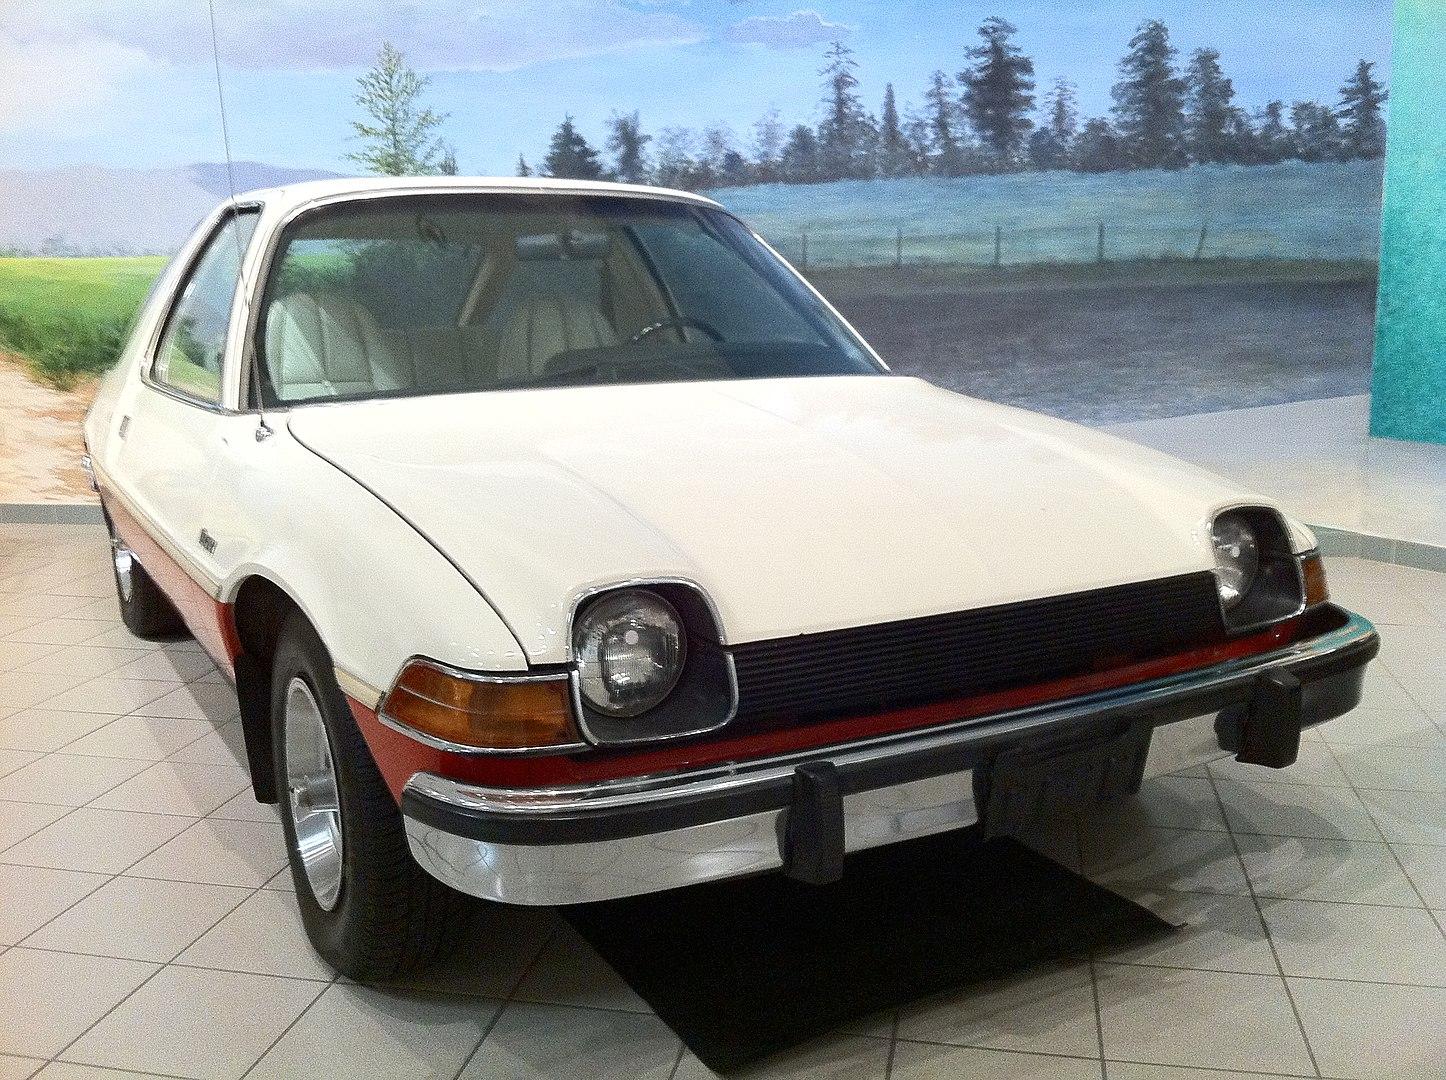 The AMC Pacer had a strong start but several design issues led to declining sales.